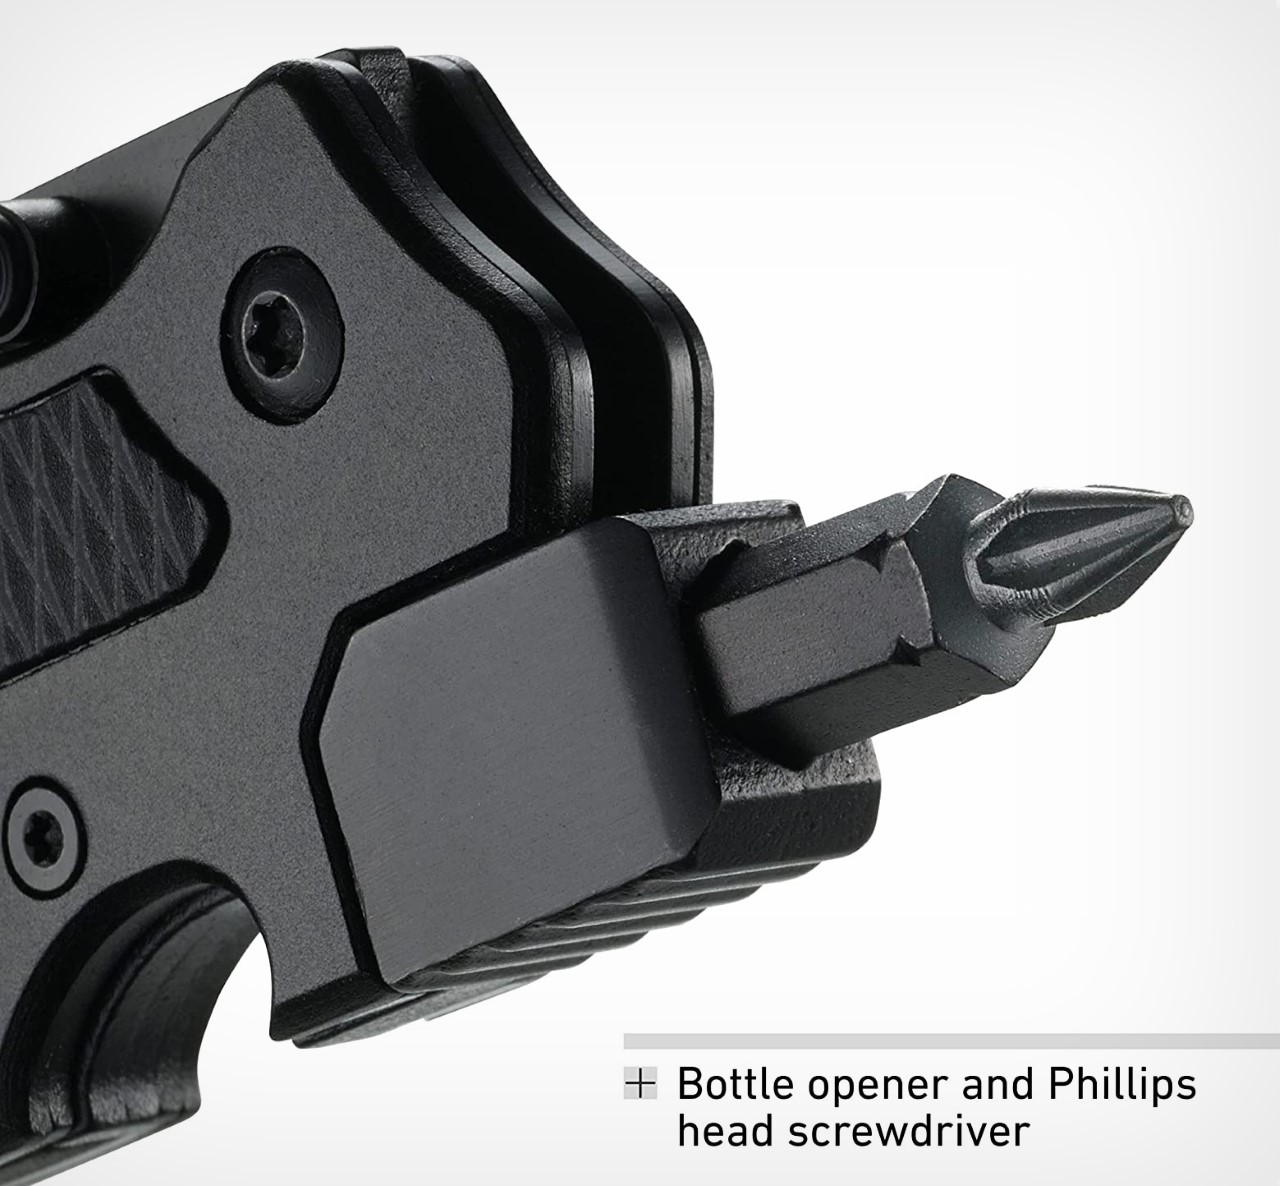 A veteran designed this compact all-in-one multitool to be an incredibly versatile tactical EDC